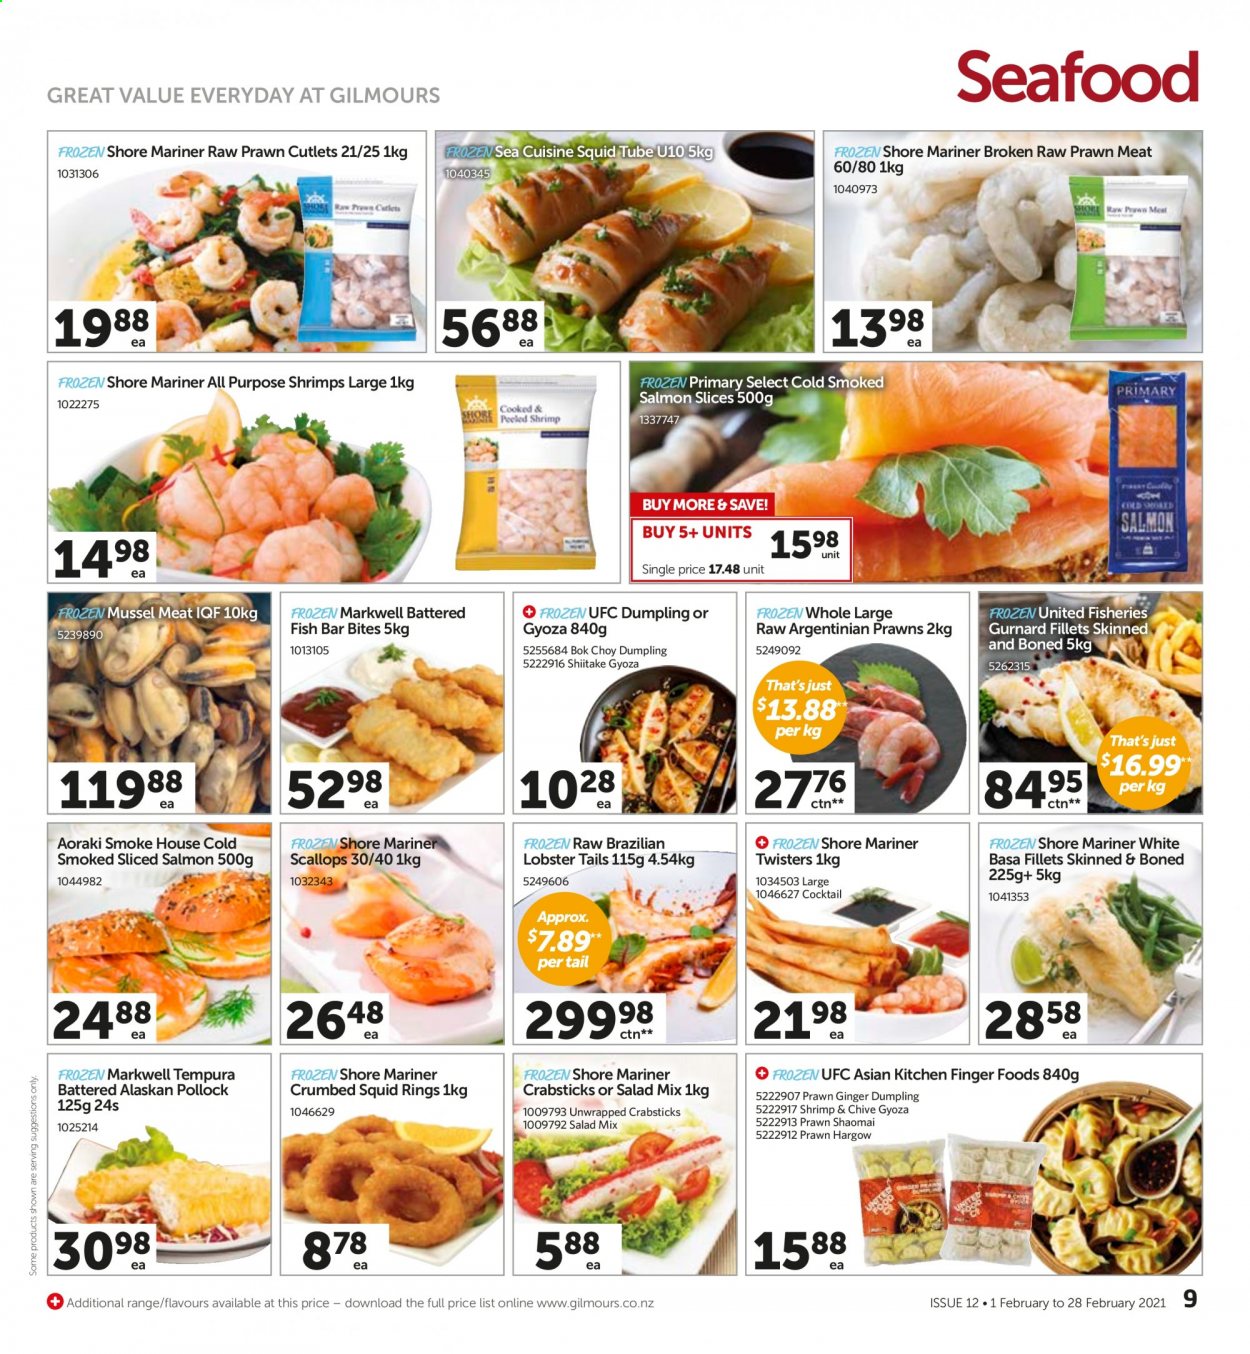 thumbnail - Gilmours mailer - 01.02.2021 - 28.02.2021 - Sales products - bok choy, ginger, lobster, mussels, salmon, scallops, shrimps, smoked salmon, squid, pollock, seafood, prawns, fish, lobster tail, Shore Mariner, squid rings, dumplings. Page 9.